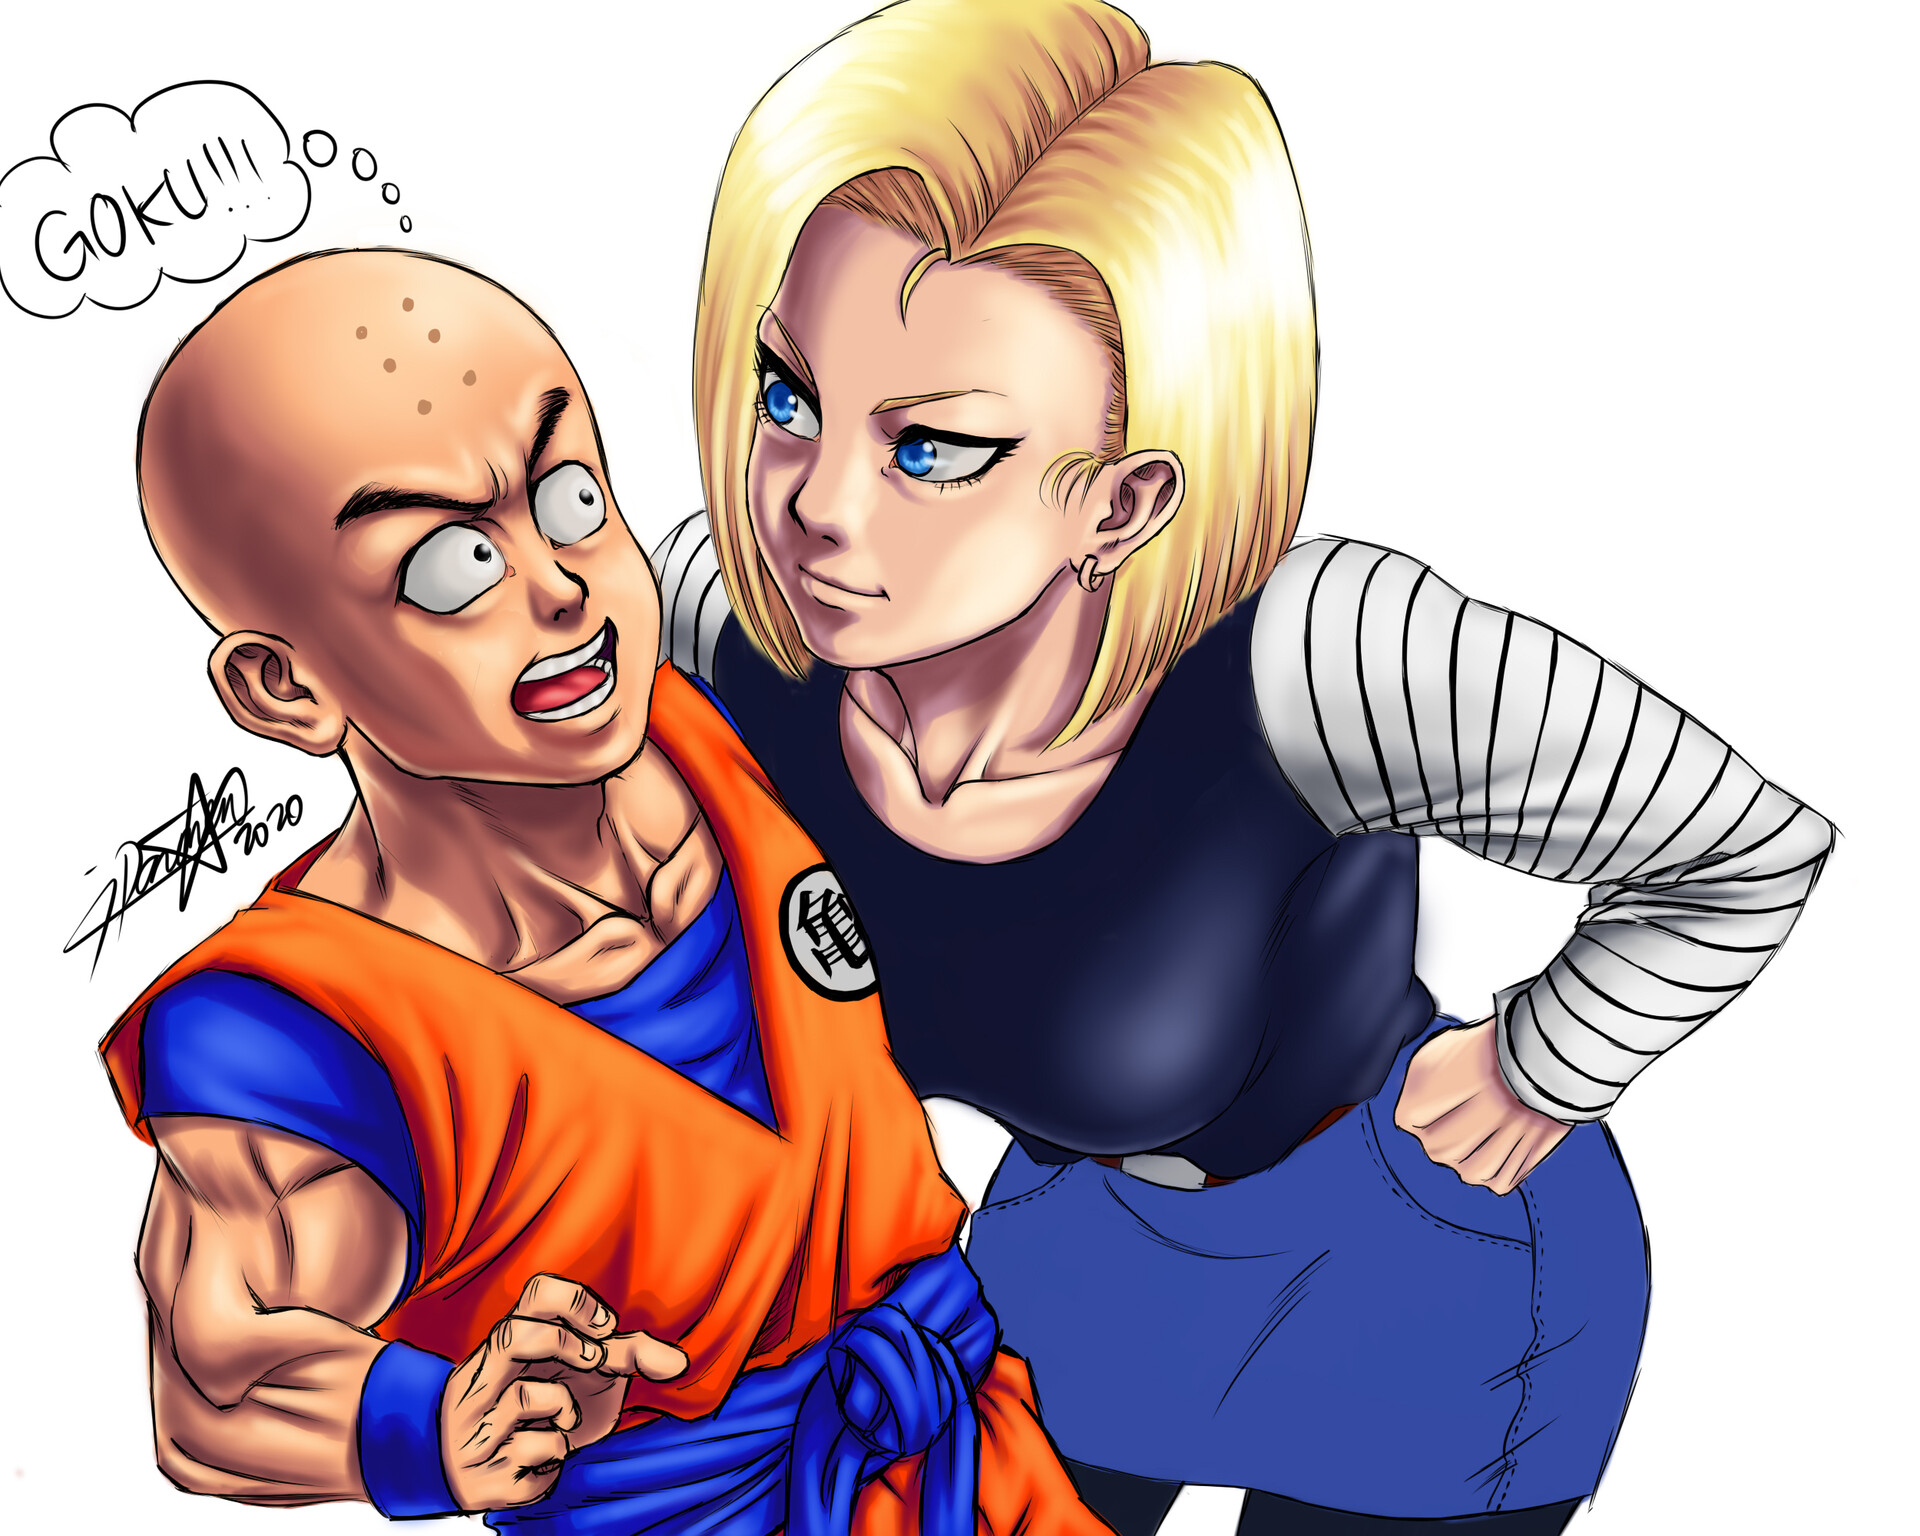 cindy de gouveia recommends krillin x android 18 pic